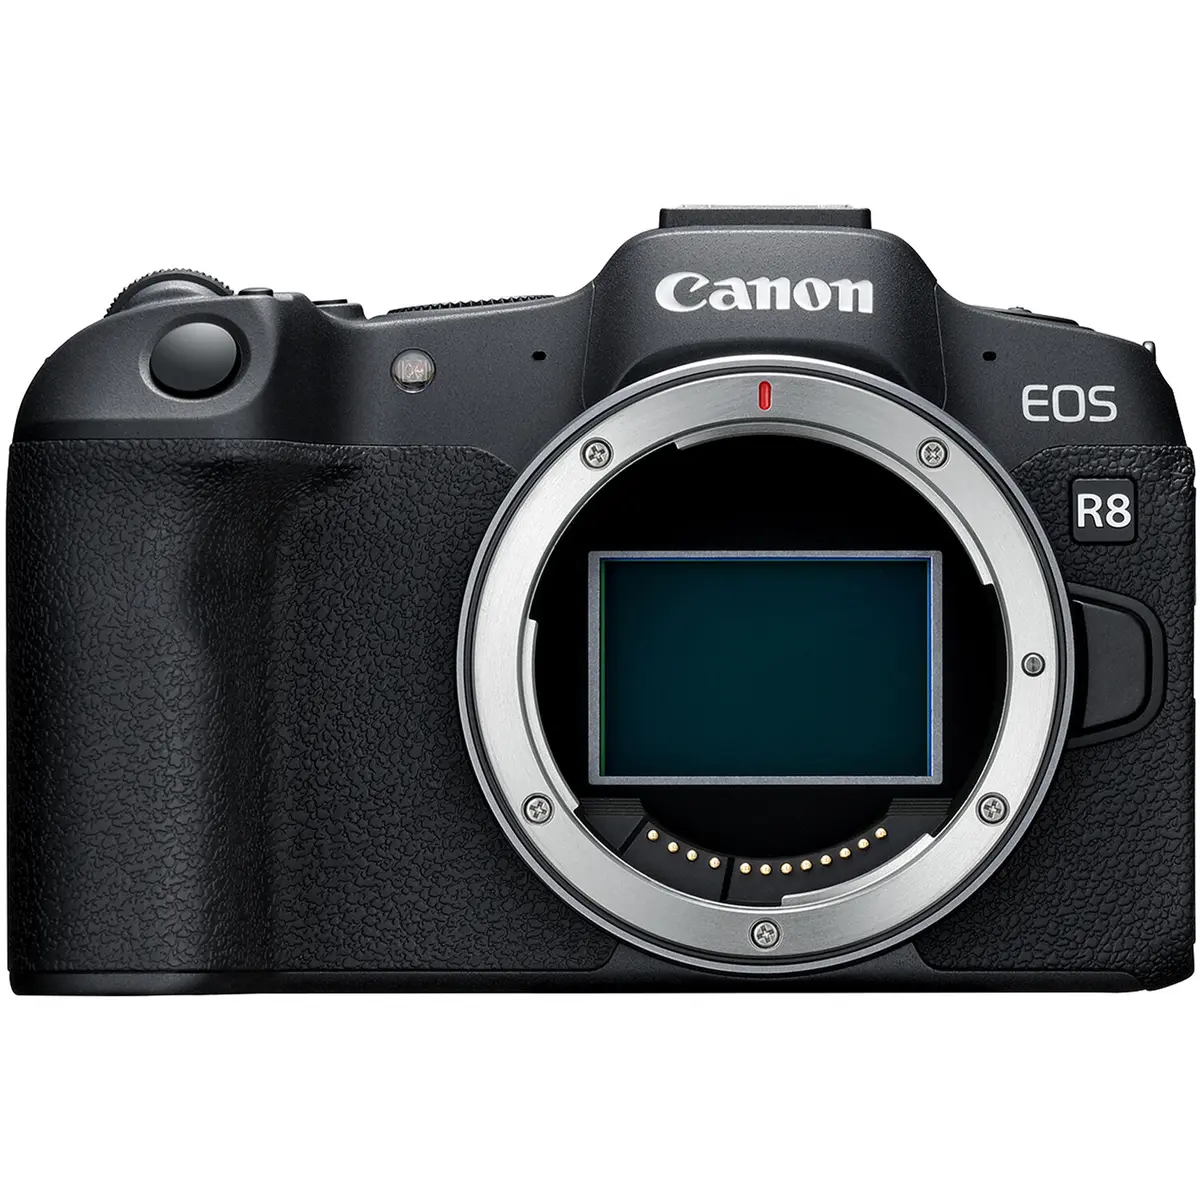 Main Image Canon EOS R8 Body (with adapter)